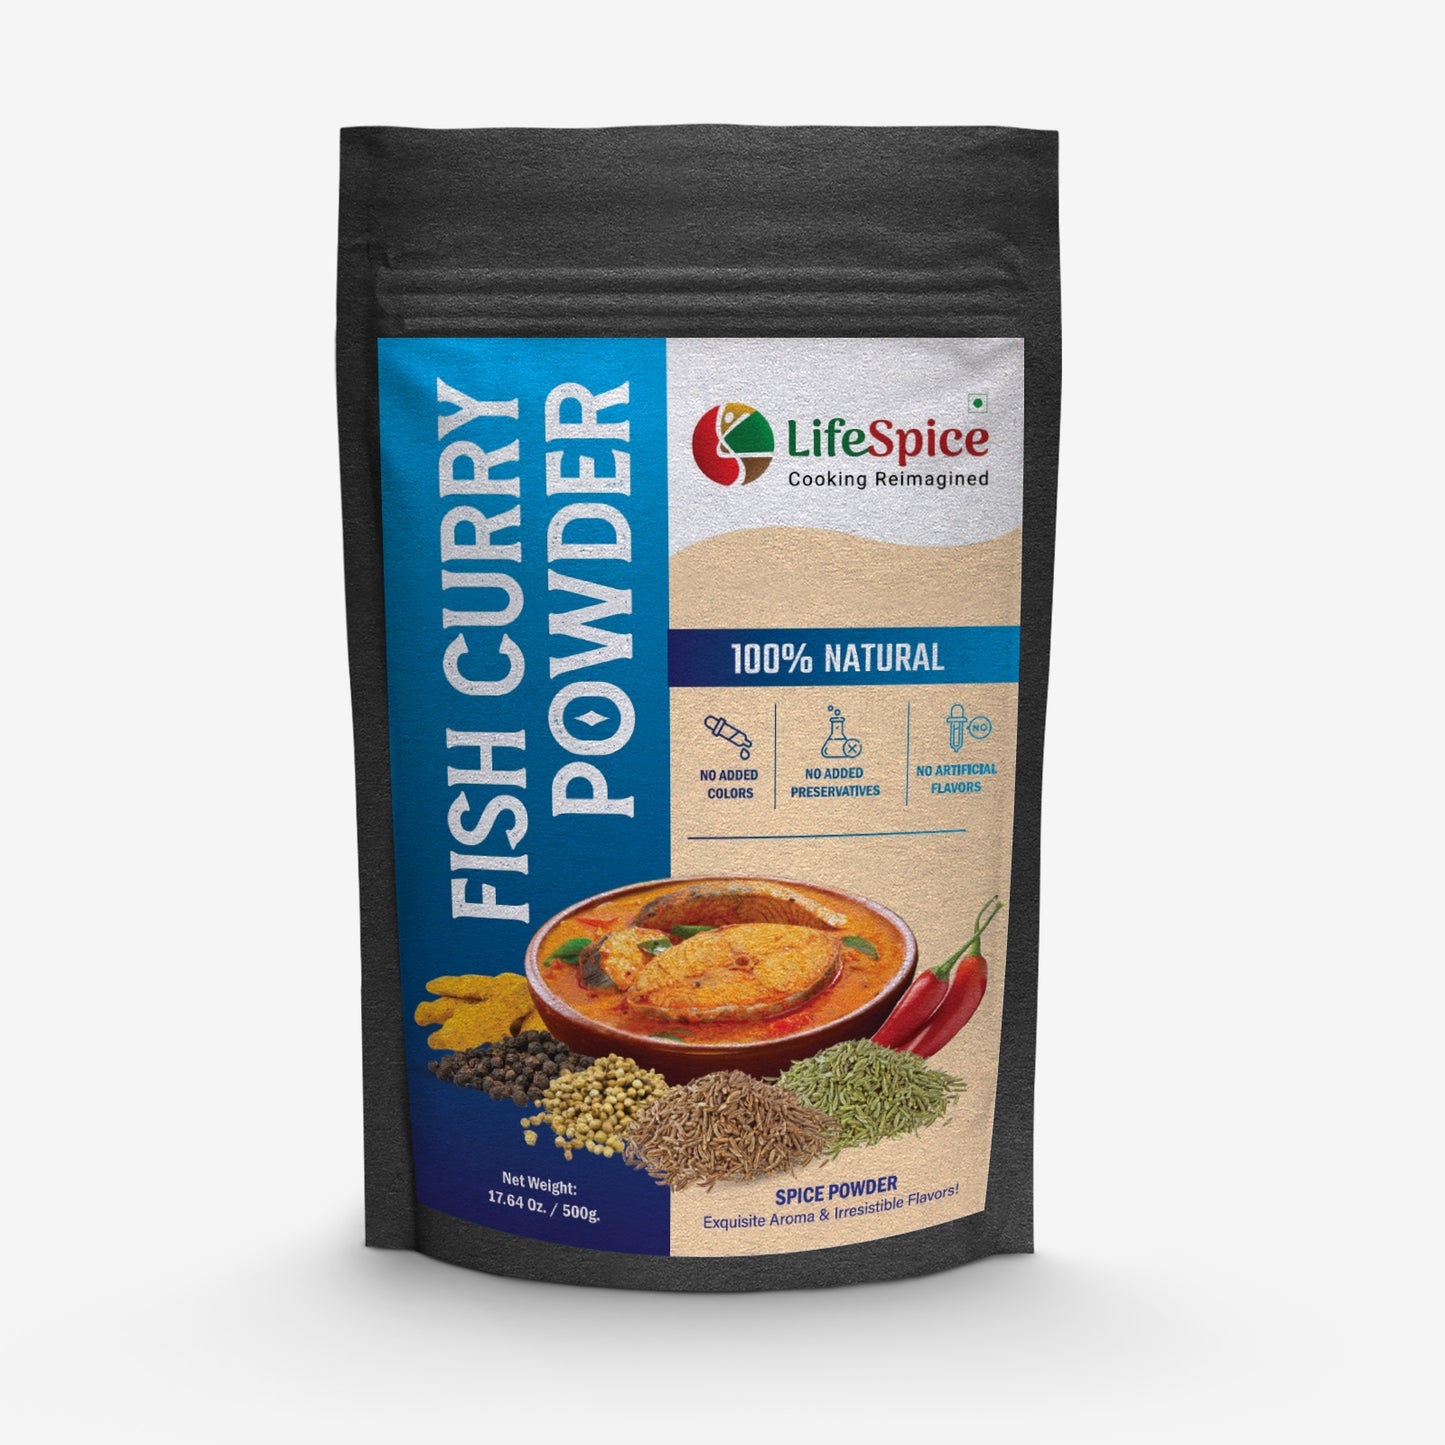 Lifespice Fish curry powder - 500g pouch